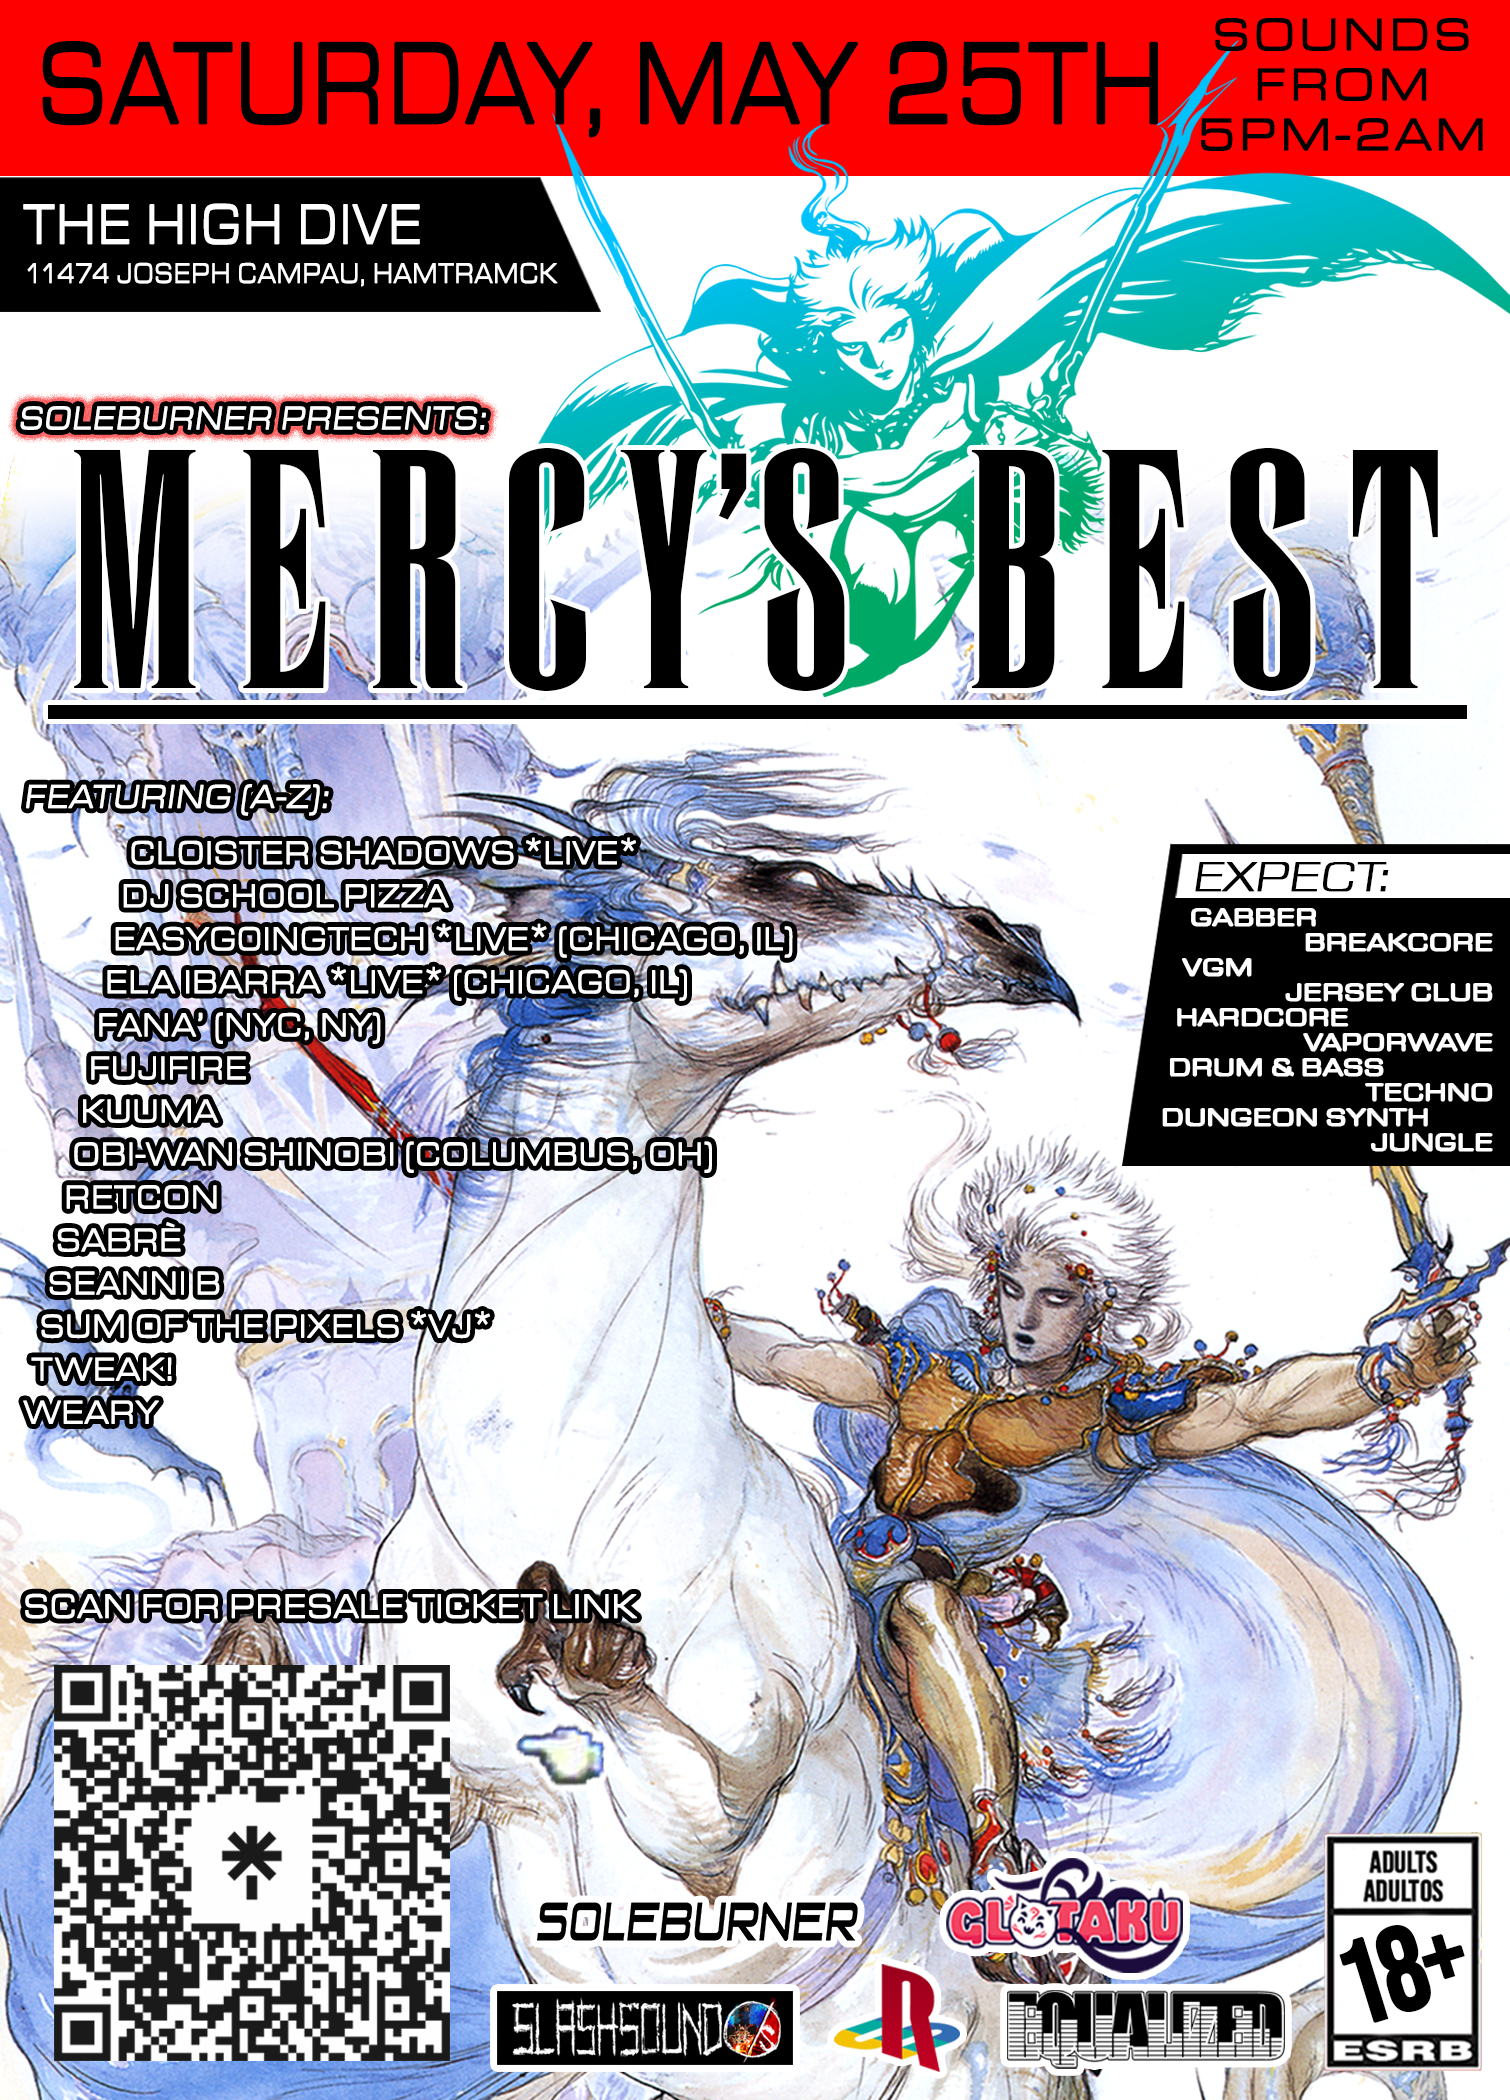 Mercy's Best: A Hardcore, Breakcore, VGM, Jungle, and Club Kinda Party - フライヤー表